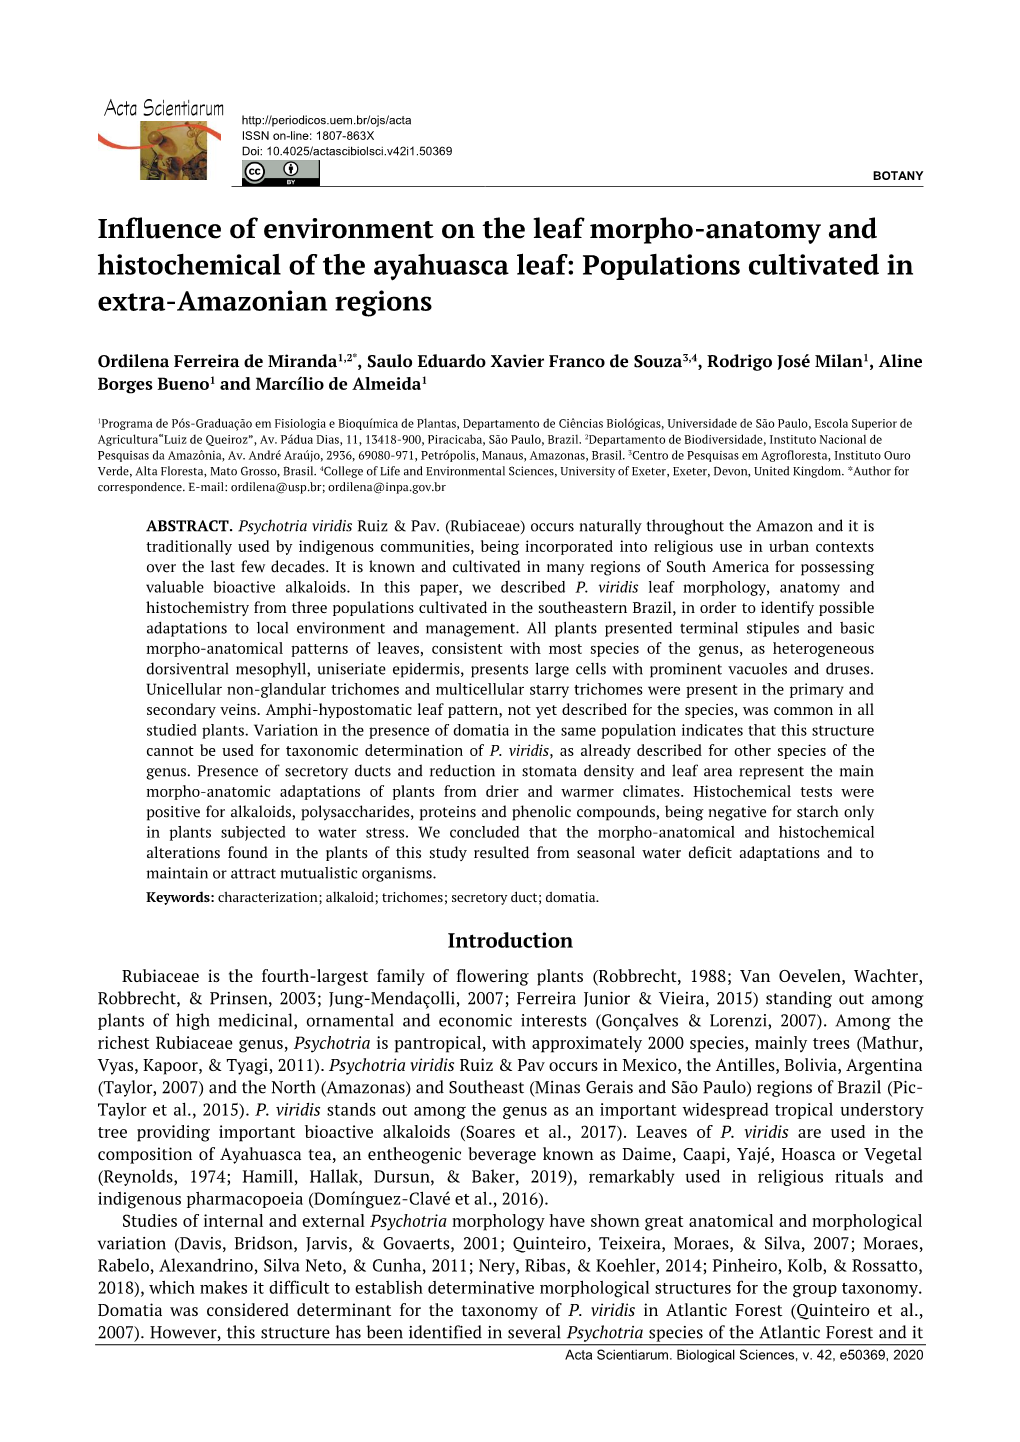 Influence of Environment on the Leaf Morpho-Anatomy and Histochemical of the Ayahuasca Leaf: Populations Cultivated in Extra-Amazonian Regions